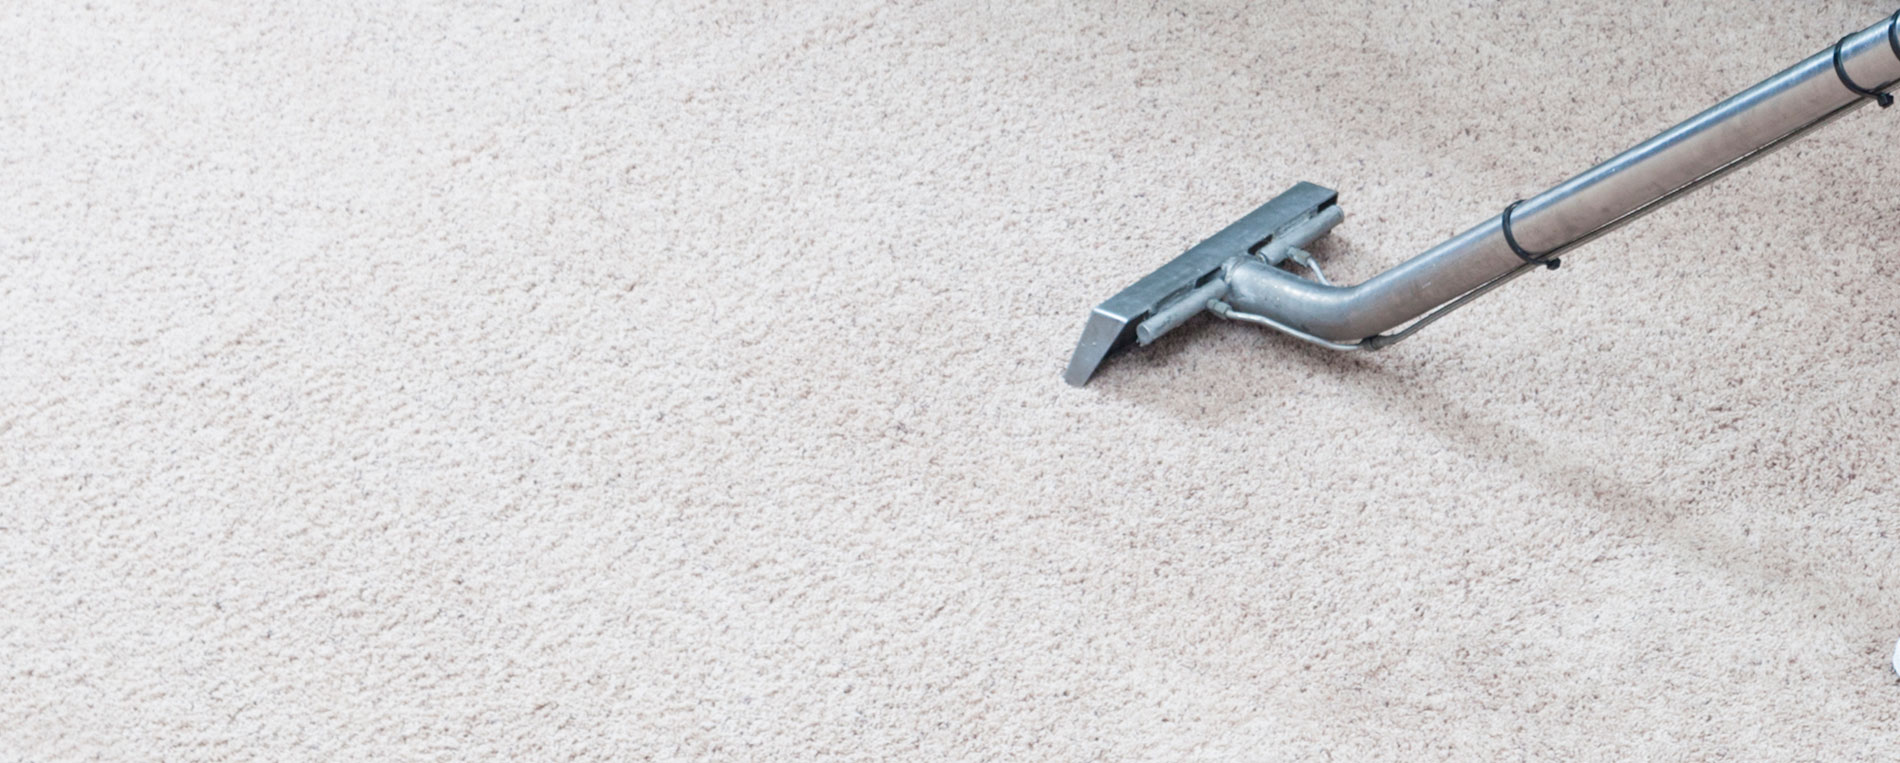 Choosing the Right Equipment for Your Carpet